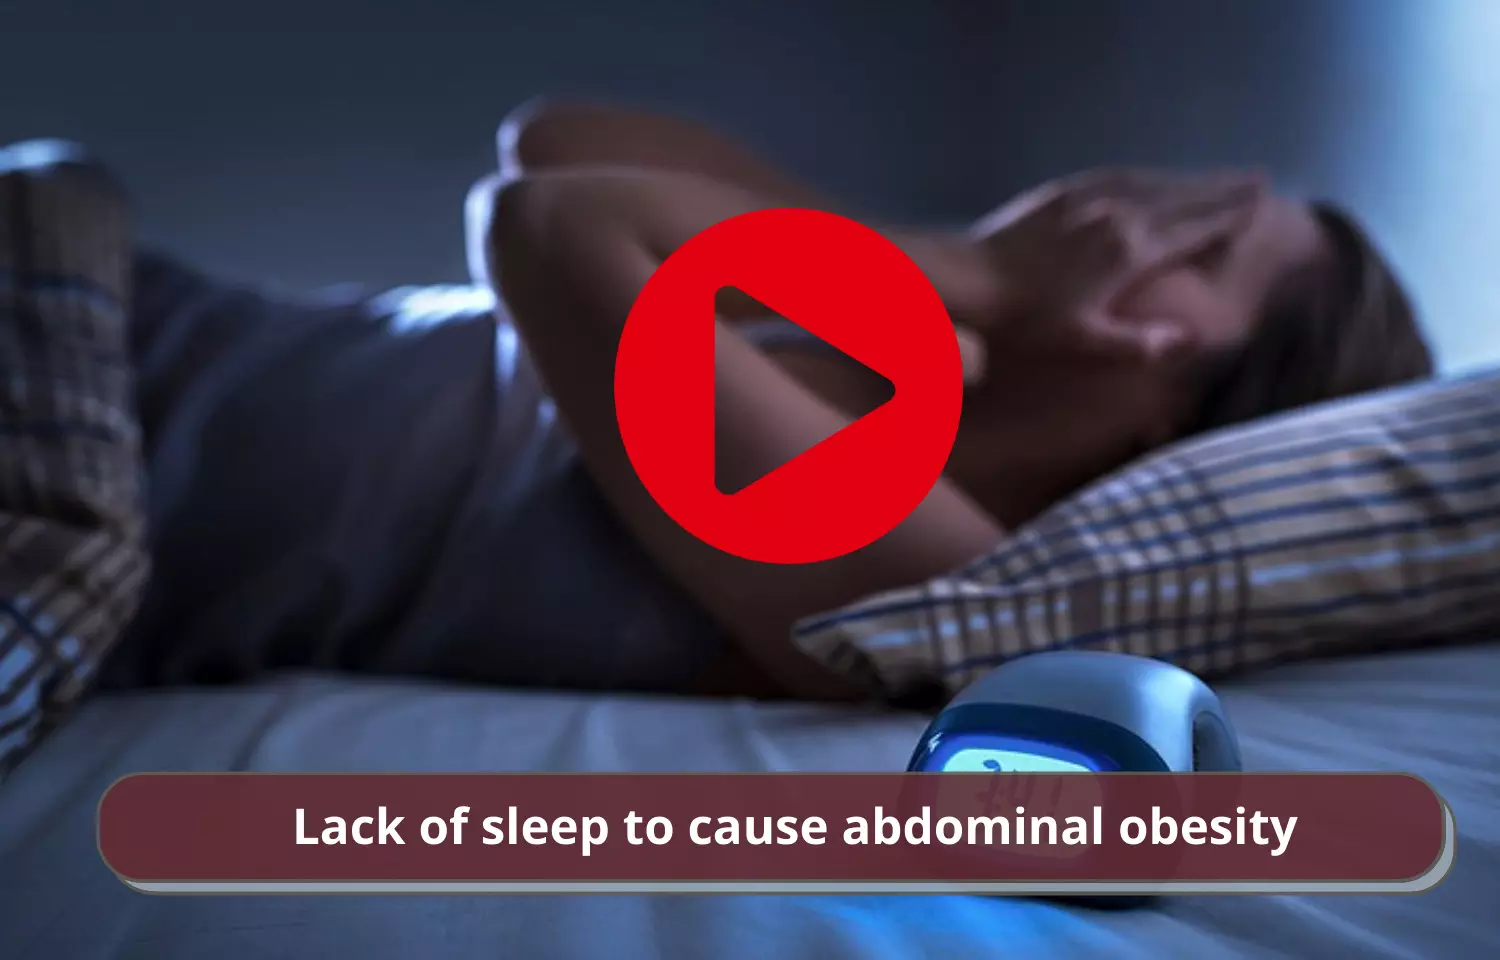 Lack of sleep more likely to cause abdominal obesity